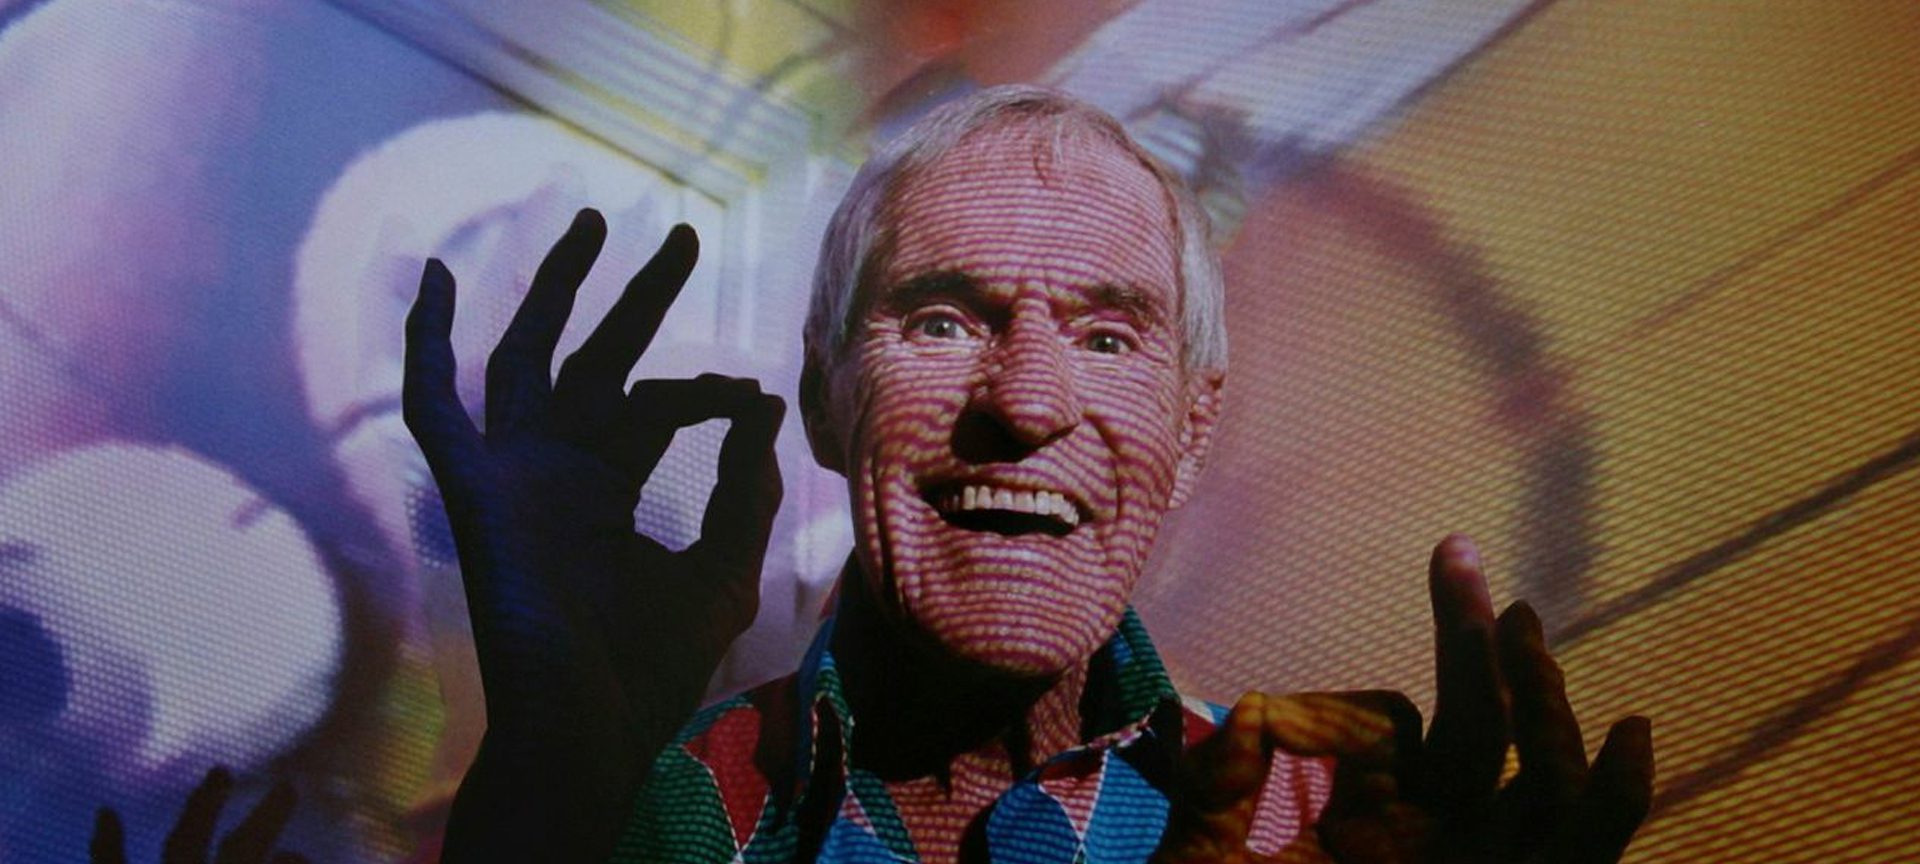 Dr. Timothy Leary